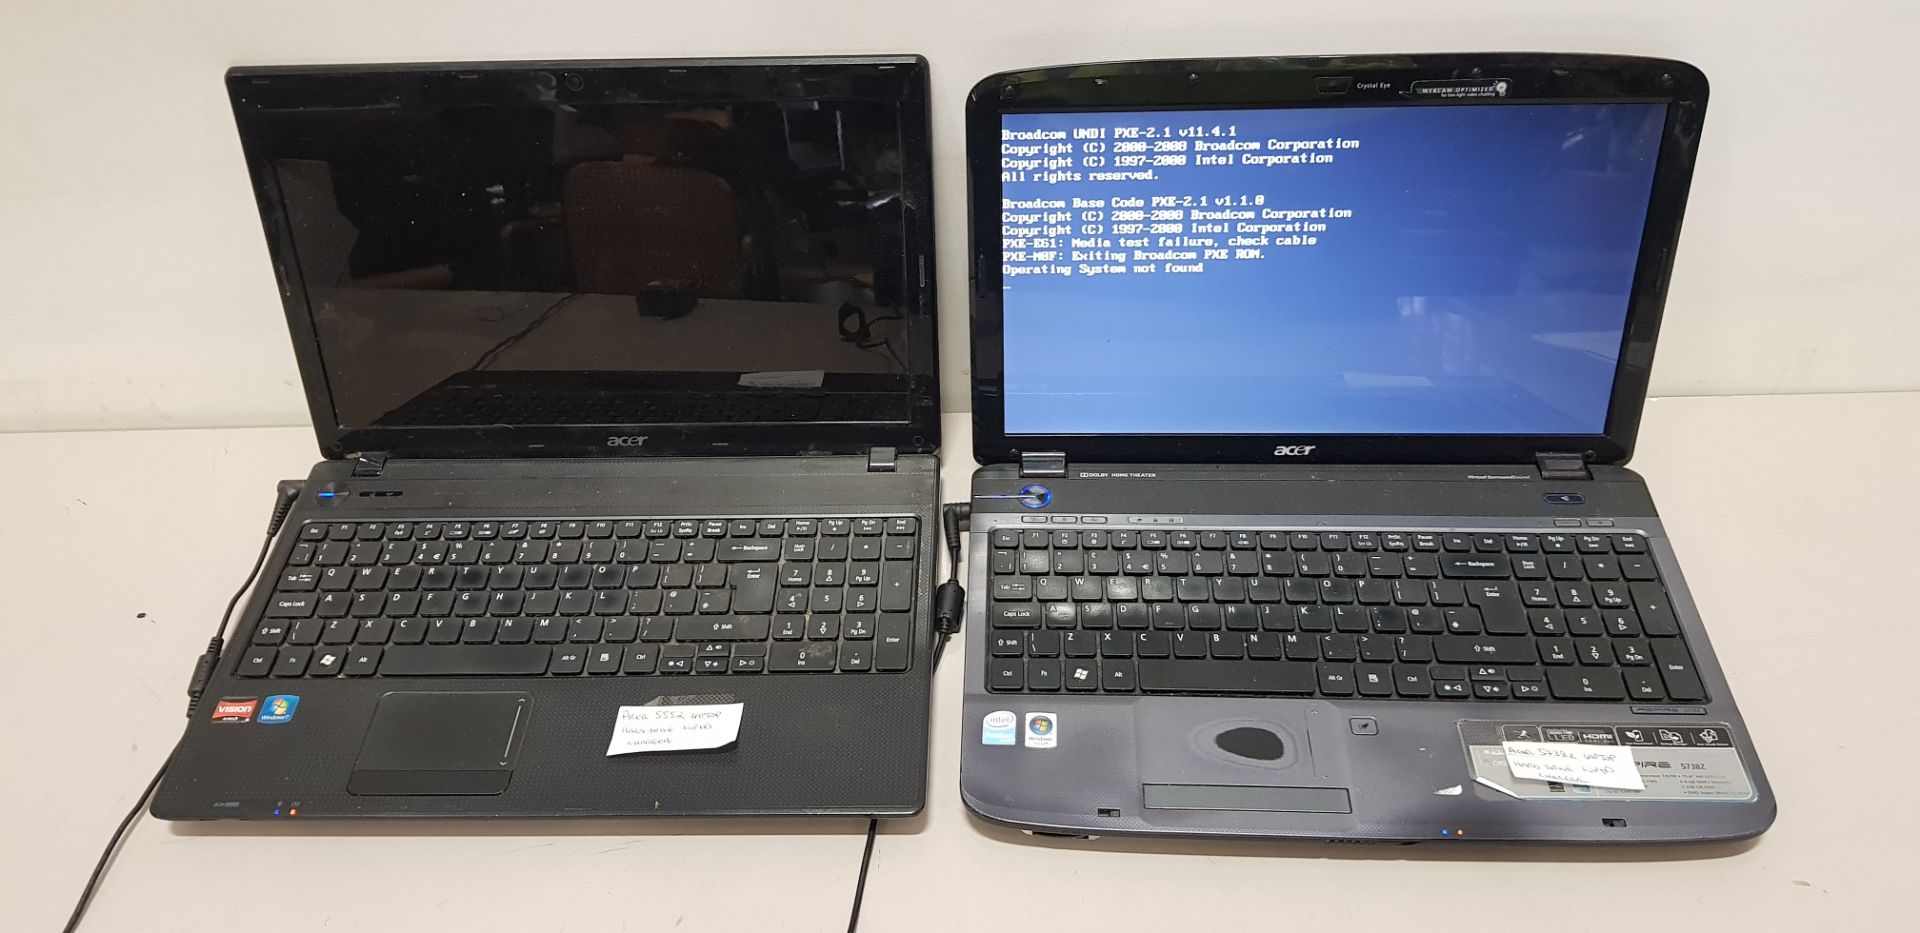 2 X ACER LAPTOPS WITH CHARGERS - 5552 AND 57382 (NO O/S)